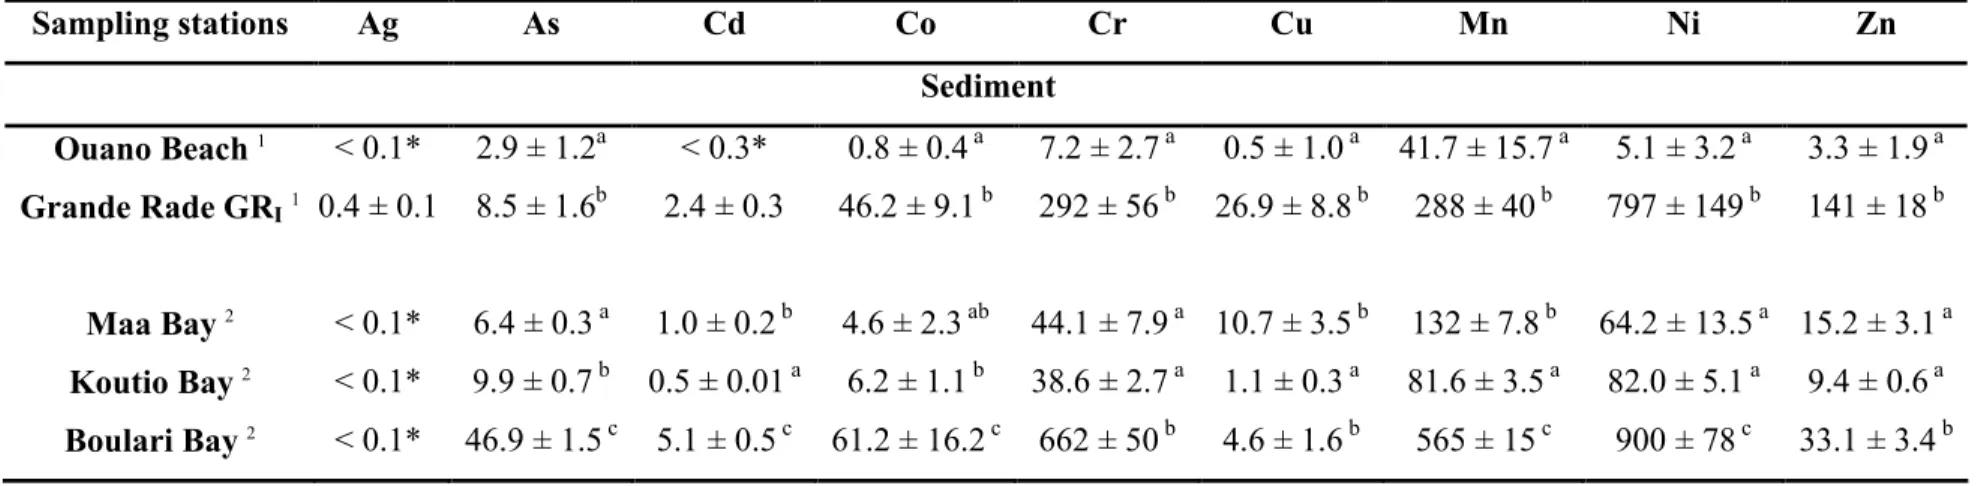 Table 1. Element concentrations in sediment (mean ± SD; µg g -1 dry wt, n = 3). Sampling stations Ag As Cd Co Cr Cu Mn Ni Zn Sediment Ouano Beach 1 &lt; 0.1* 2.9 ± 1.2 a &lt; 0.3* 0.8 ± 0.4 a 7.2 ± 2.7 a 0.5 ± 1.0 a 41.7 ± 15.7 a 5.1 ± 3.2 a 3.3 ± 1.9 a Gr